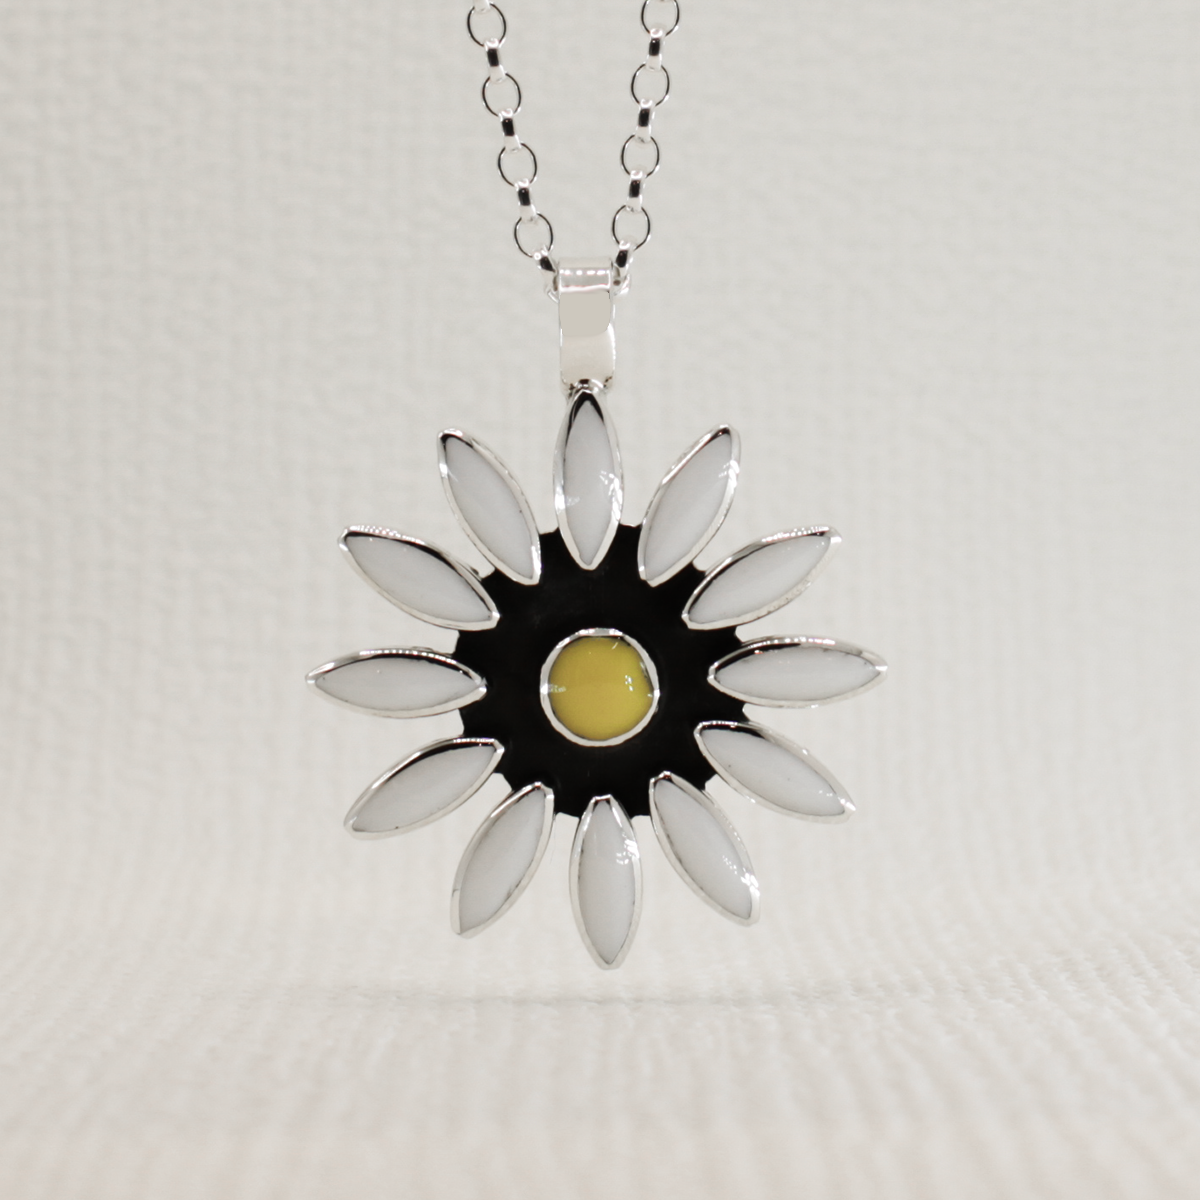 This gorgeous Sleveen White Resin Daisy Silver Pendant is sure to turn heads! It measures 32mm in diameter and 46mm from the top of the bail and is crafted with .925 silver. The bail fits up to 7mm chain and comes with an adjustable 2.5mm silver roll chain that can be adjusted from 16" to 18"!